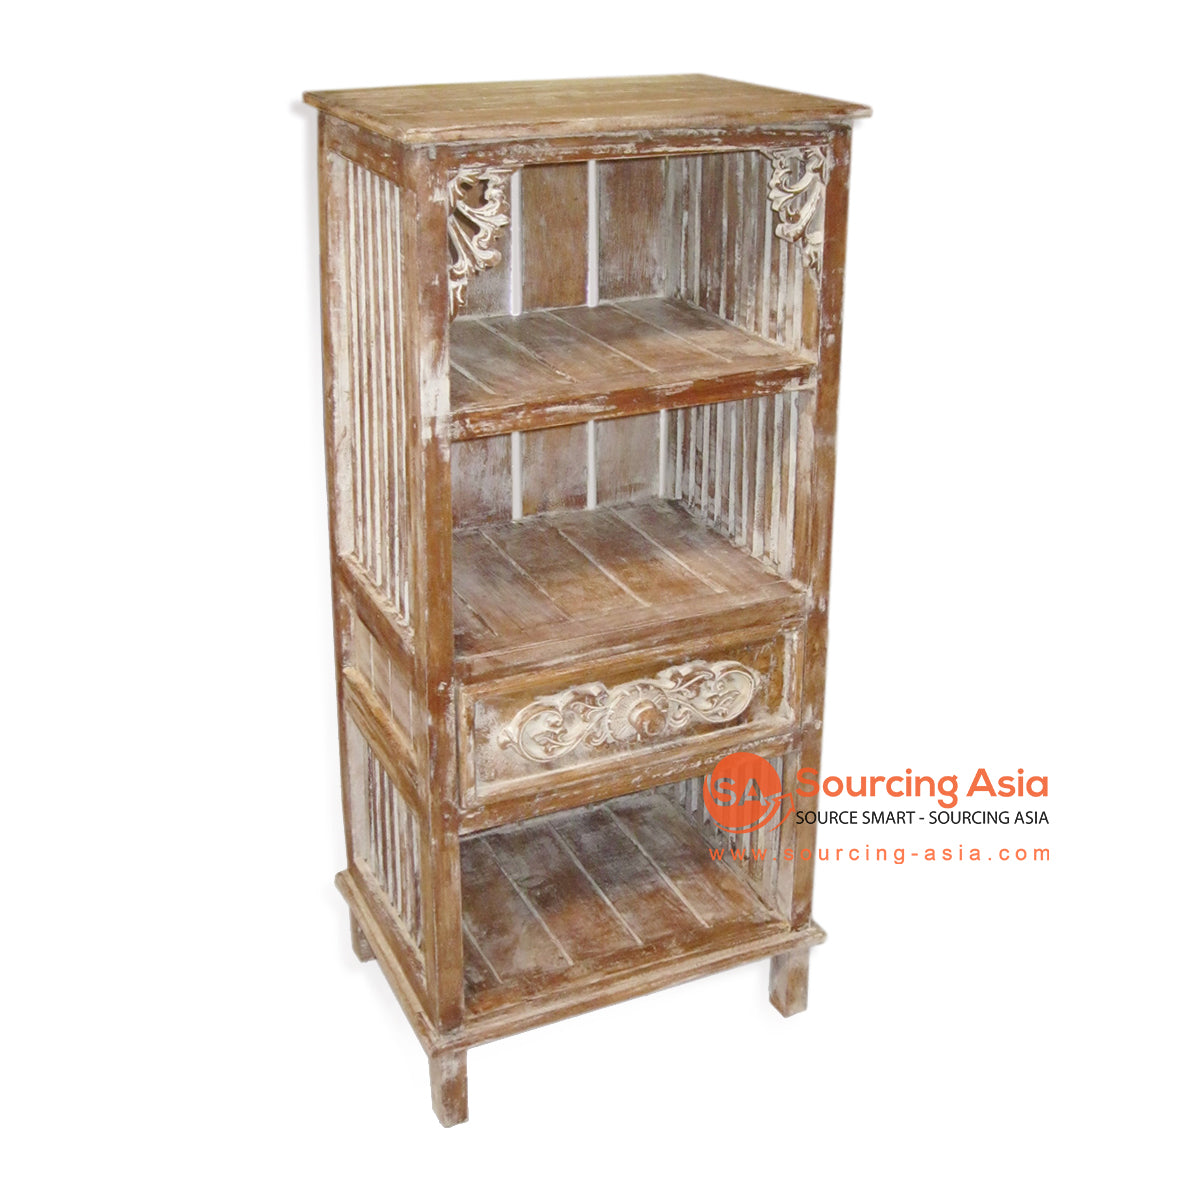 THE046-1 BROWN WASH WOODEN RACK WITH A DRAWER AND THREE SLOTS